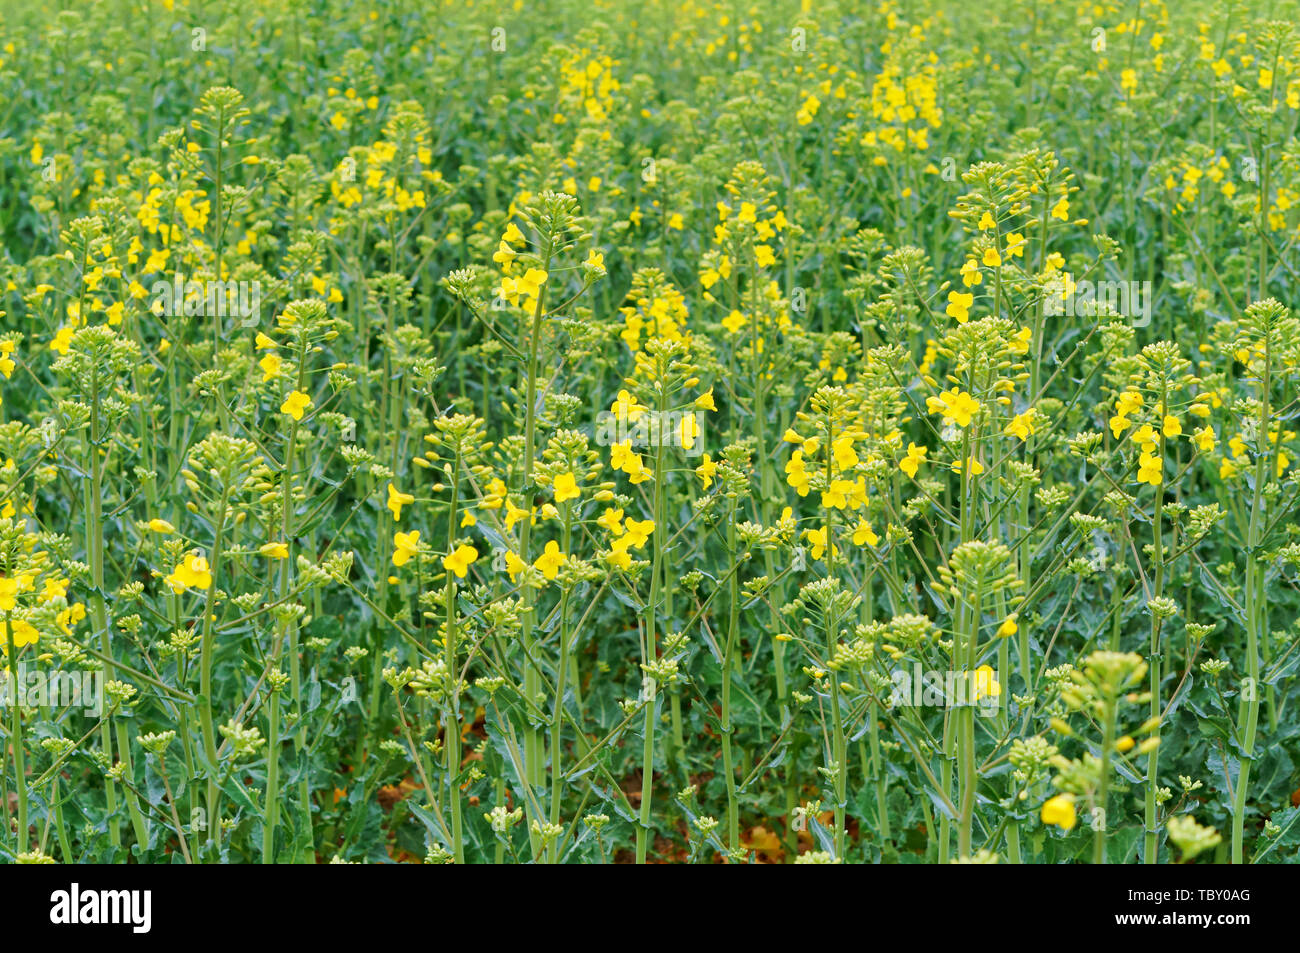 sowing crops of rapeseed, a flowering plant rape Stock Photo